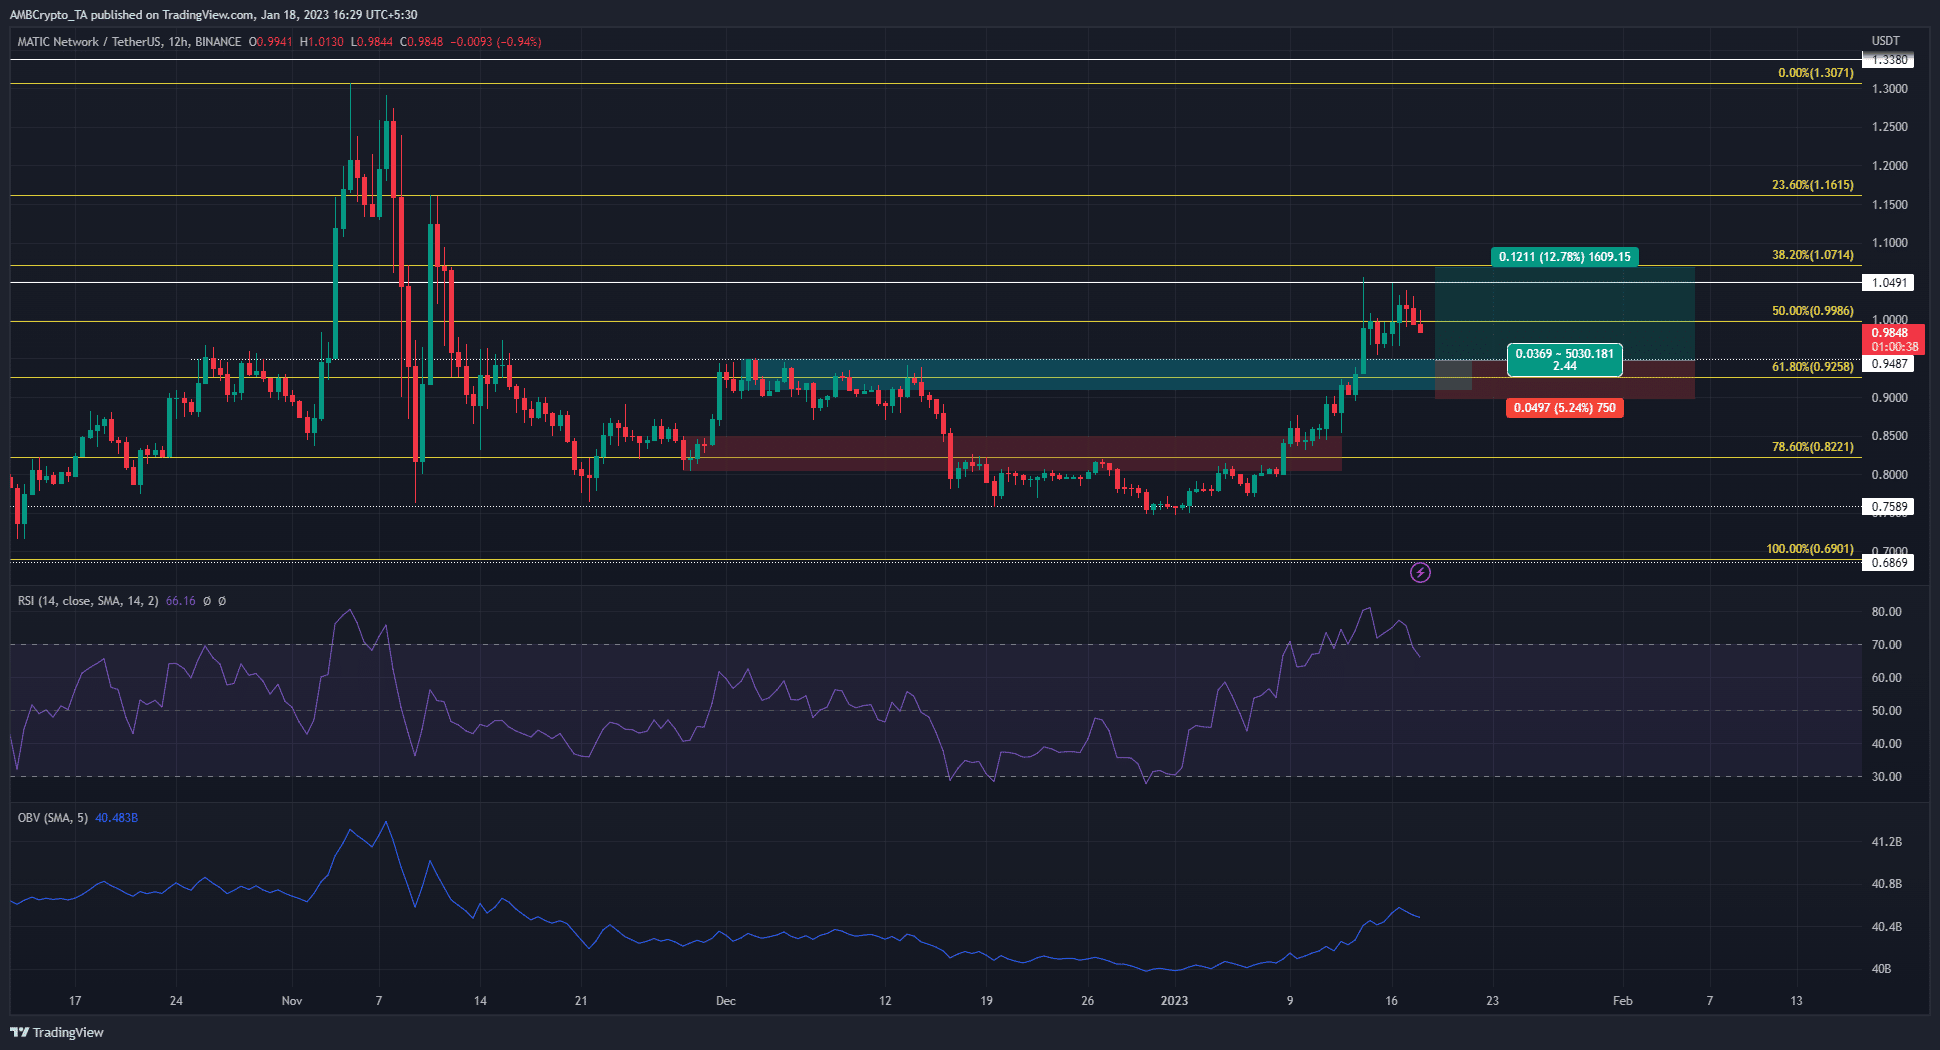 MATIC has a strong bullish structure, watch out for a dip to this level